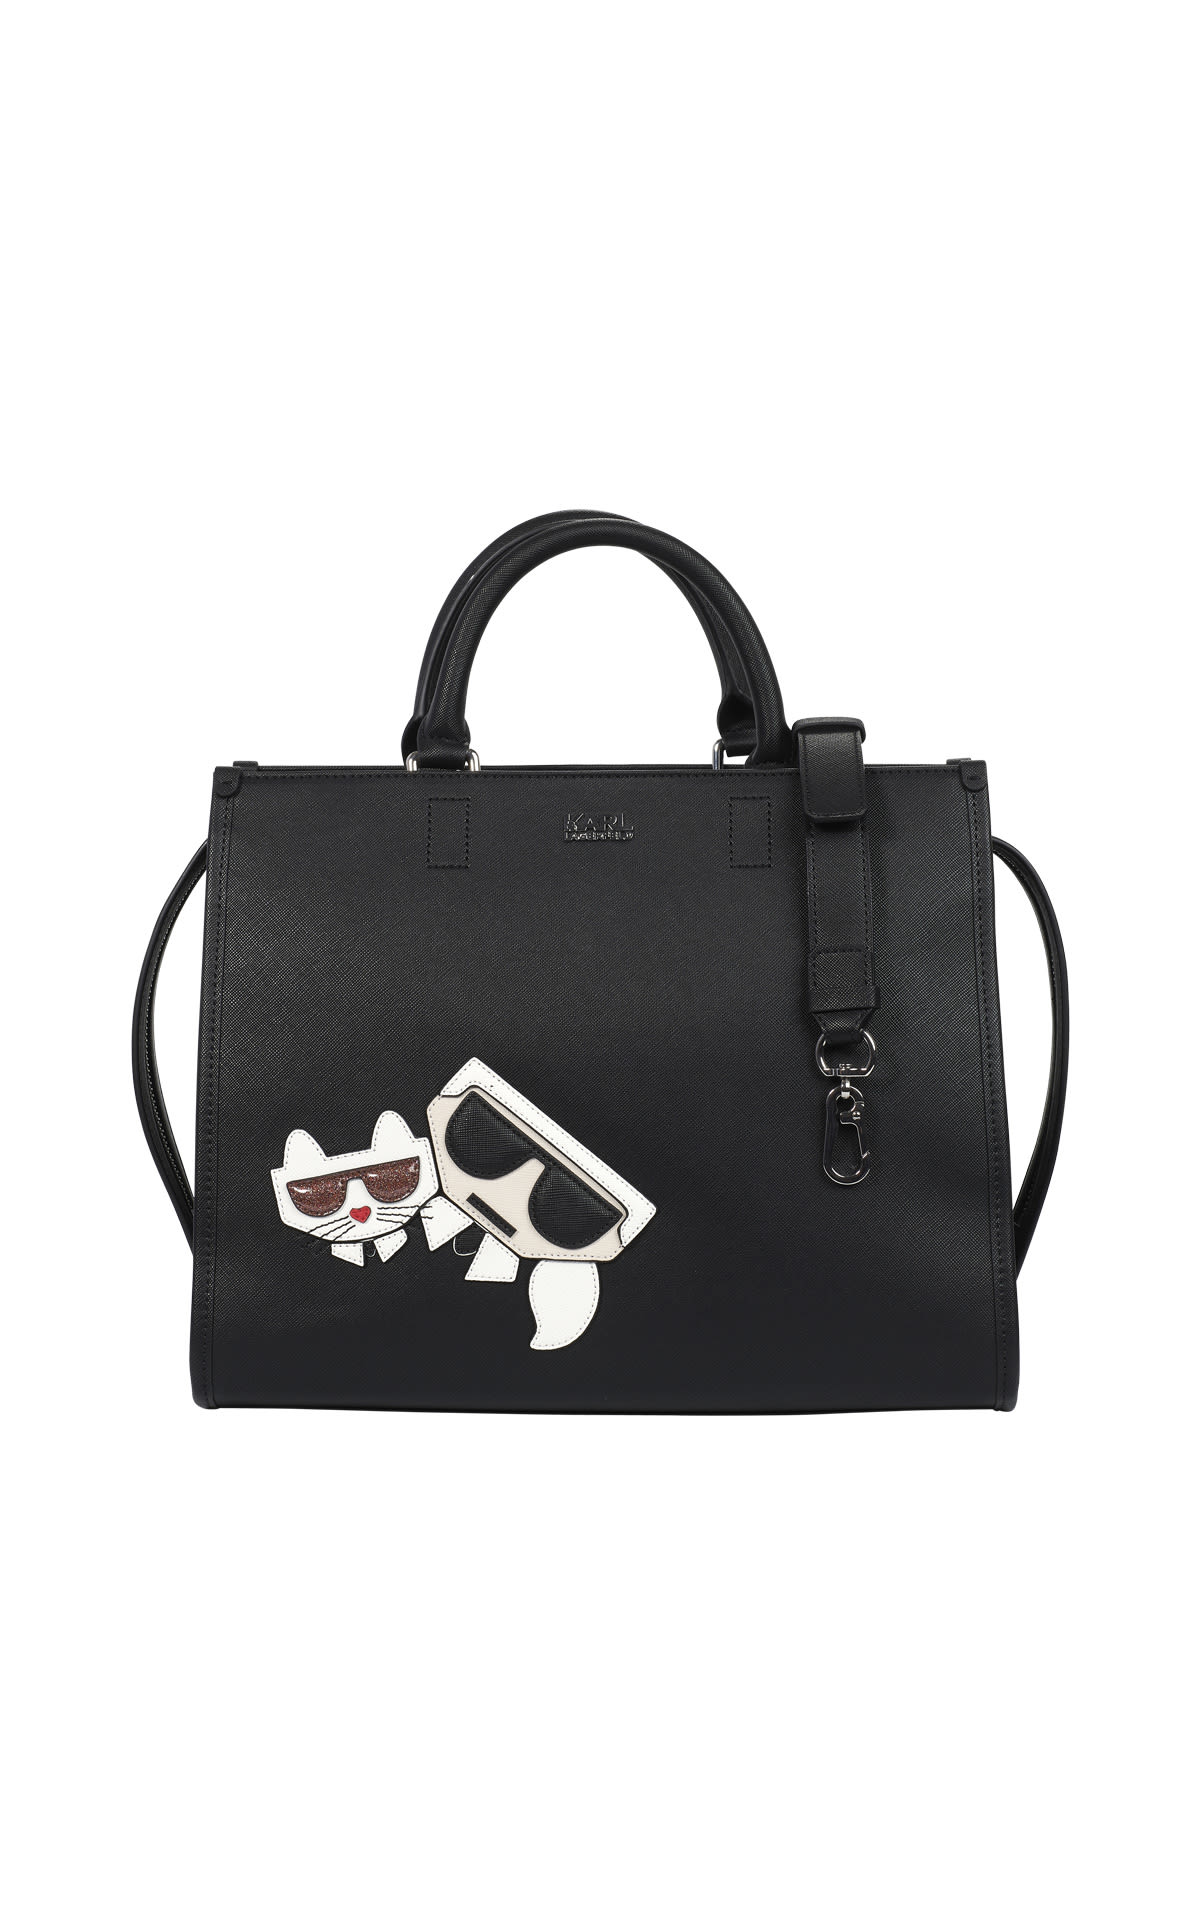 Bolso tote negro Karl Lagerfedl